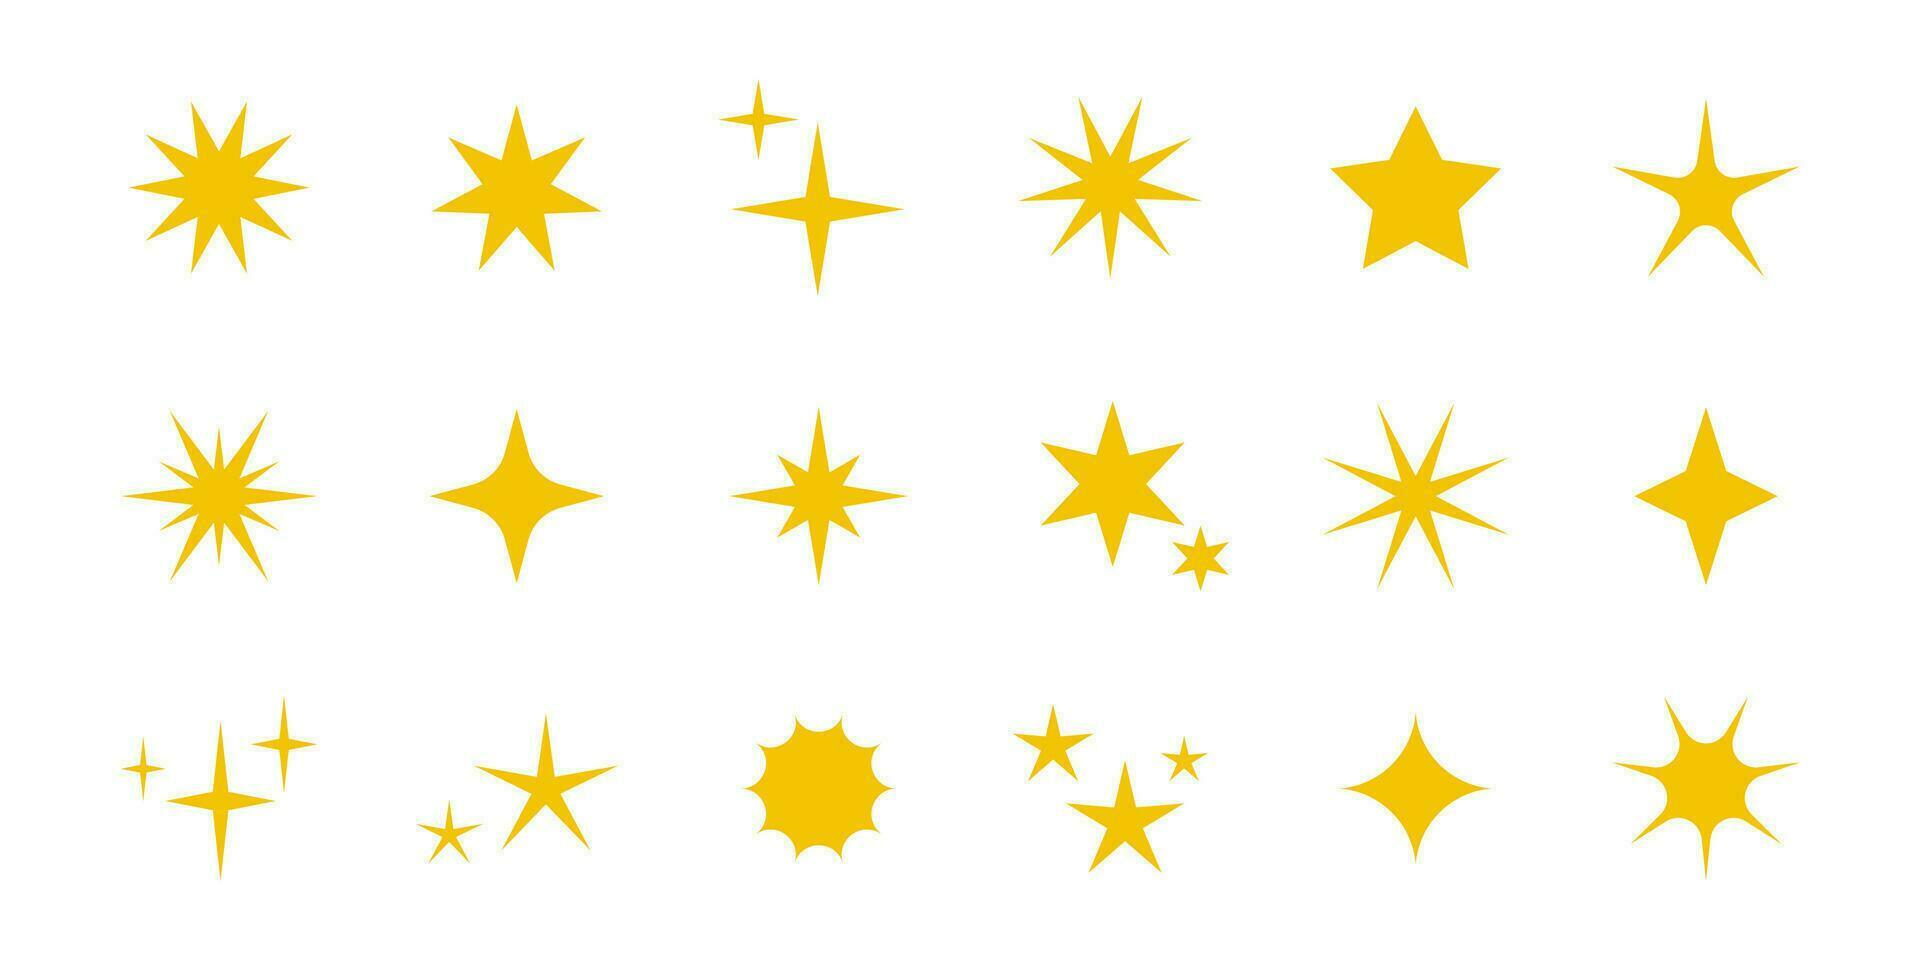 Vector yellow and gold stars sparkles icons. Collection of yellow star signs. Decoration twinkle, shiny flash. Gold glowing light stars and bursts isolated on white.